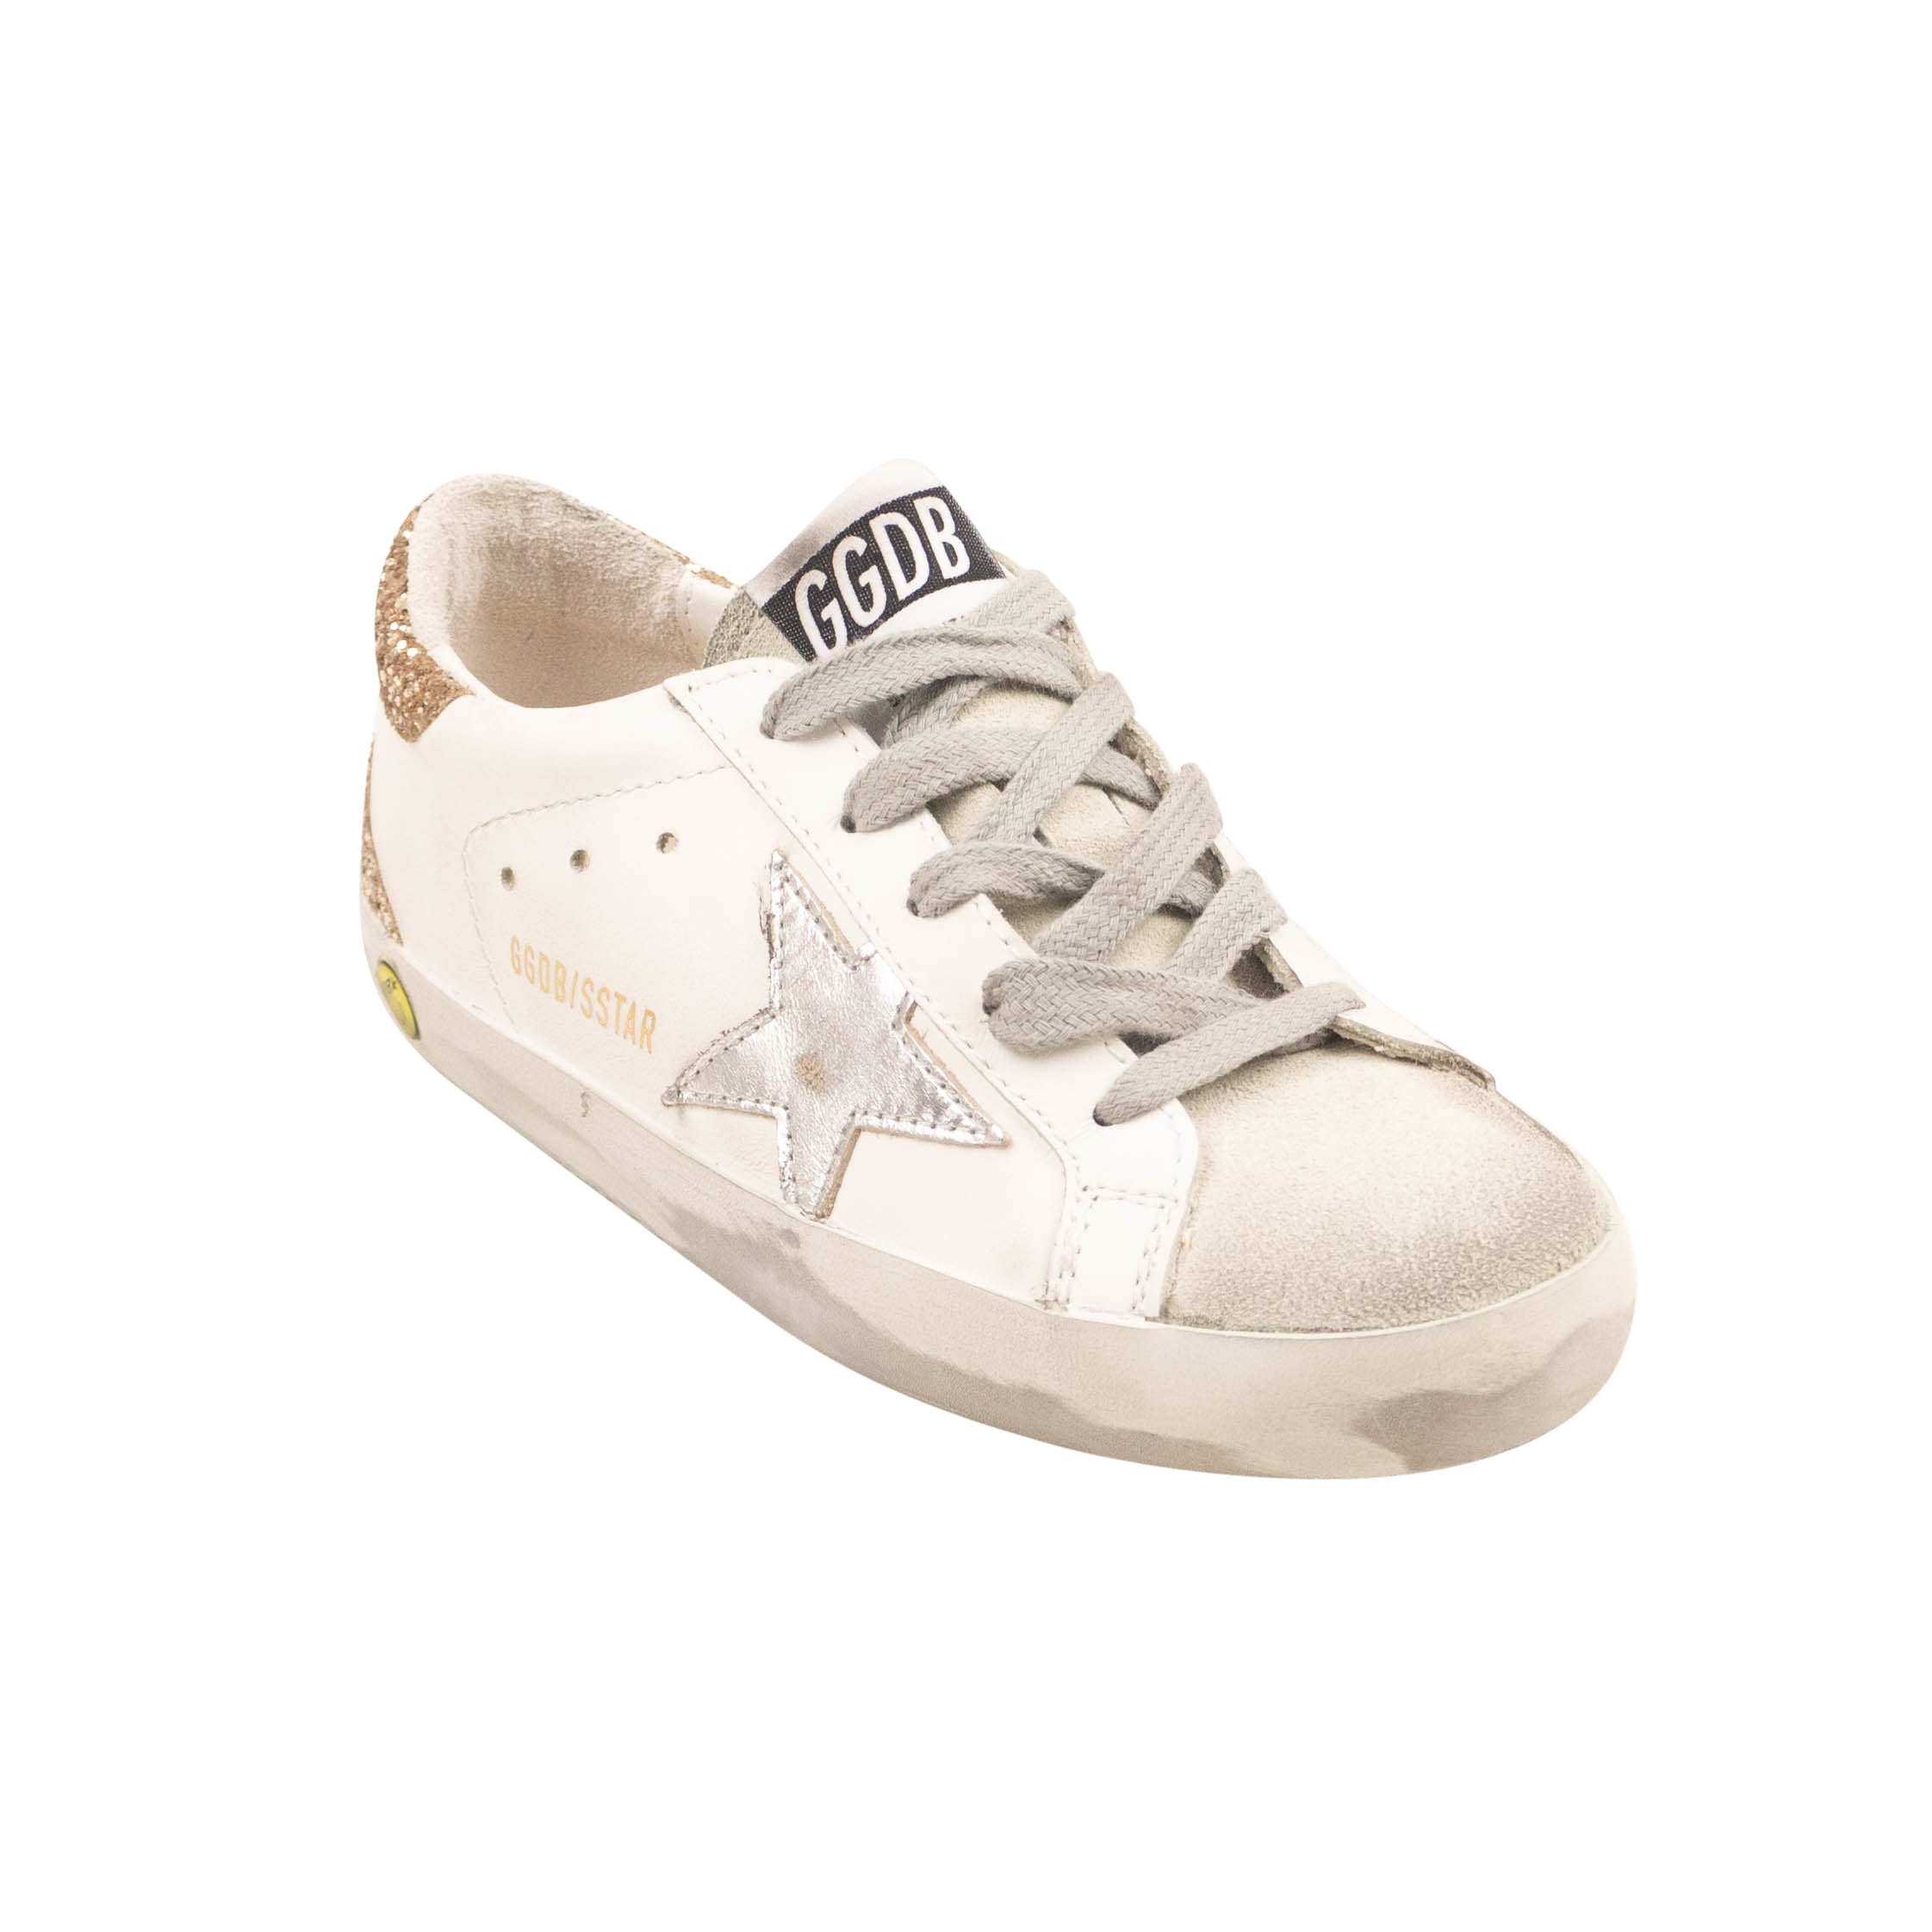 Golden Goose Leather Suede Glitter Super Star Sneakers - White